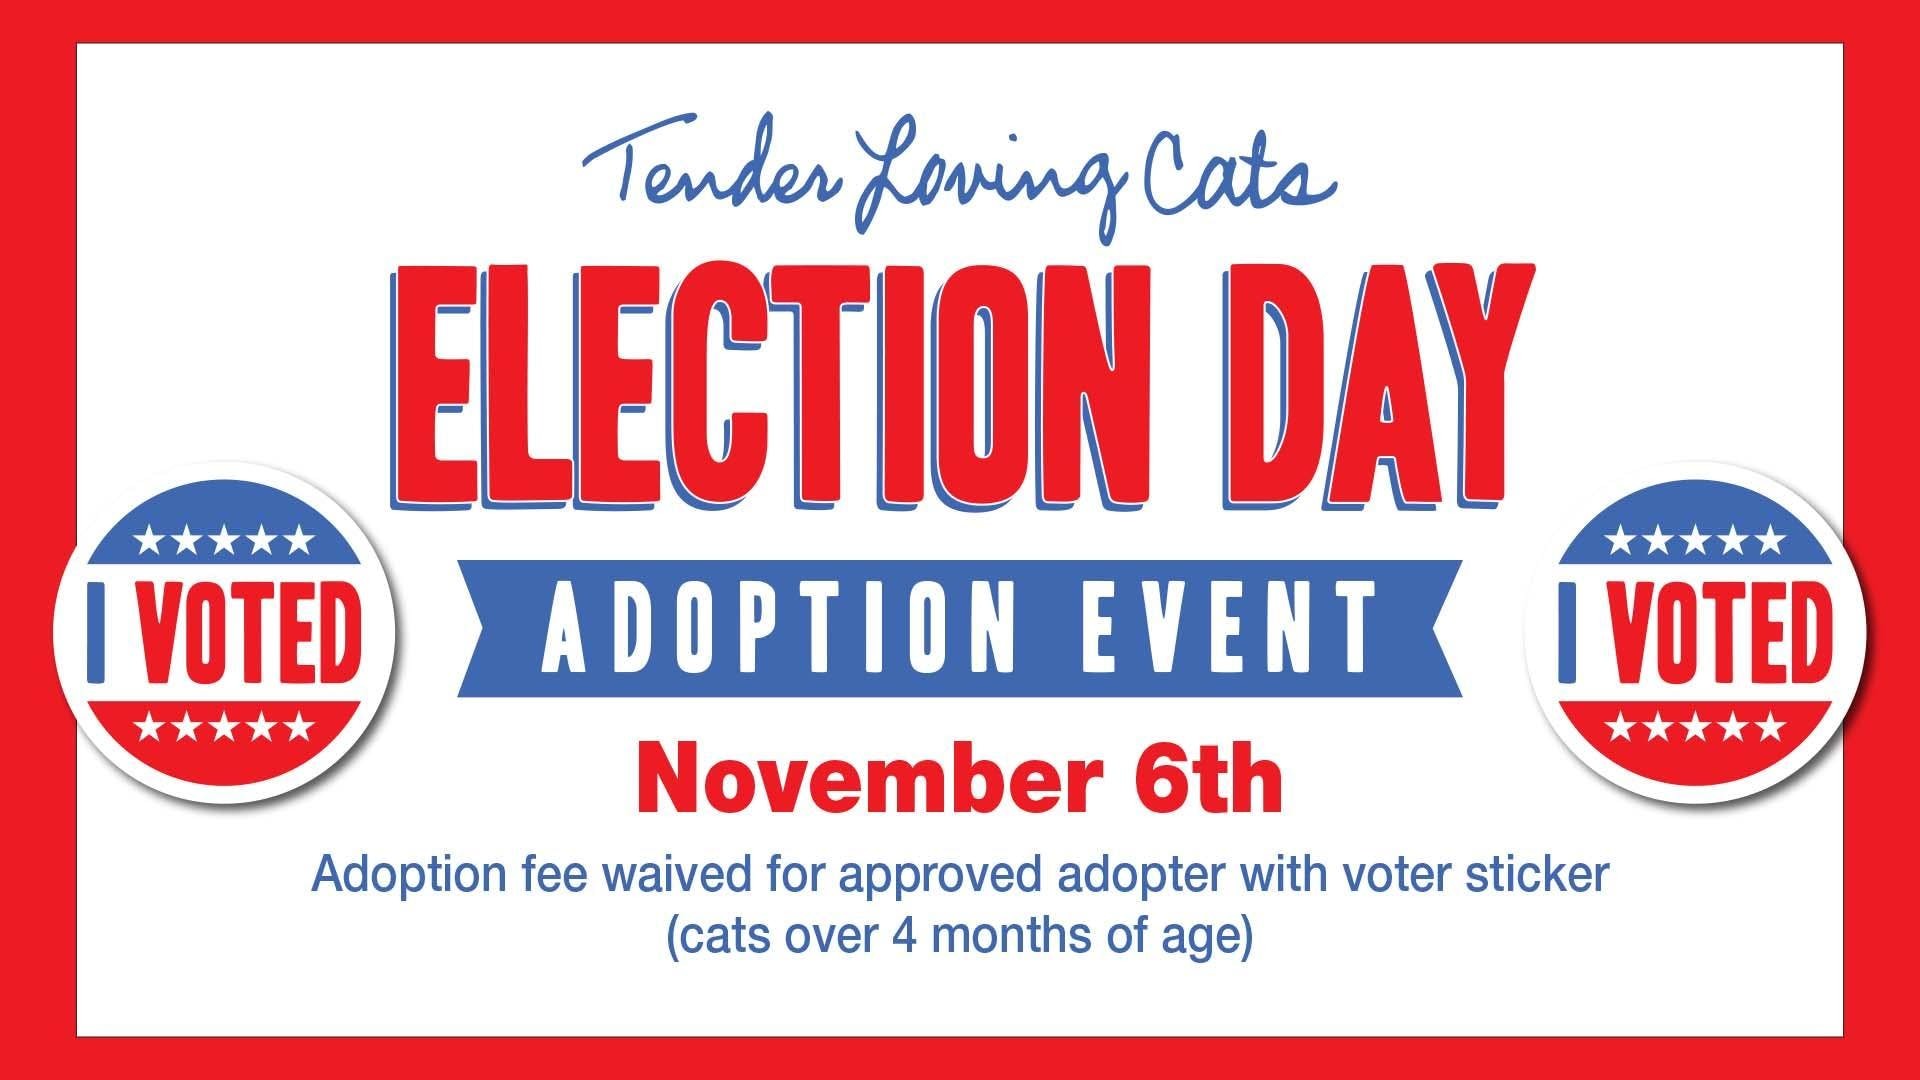 1920x1080 Election Day: Adoption Event!